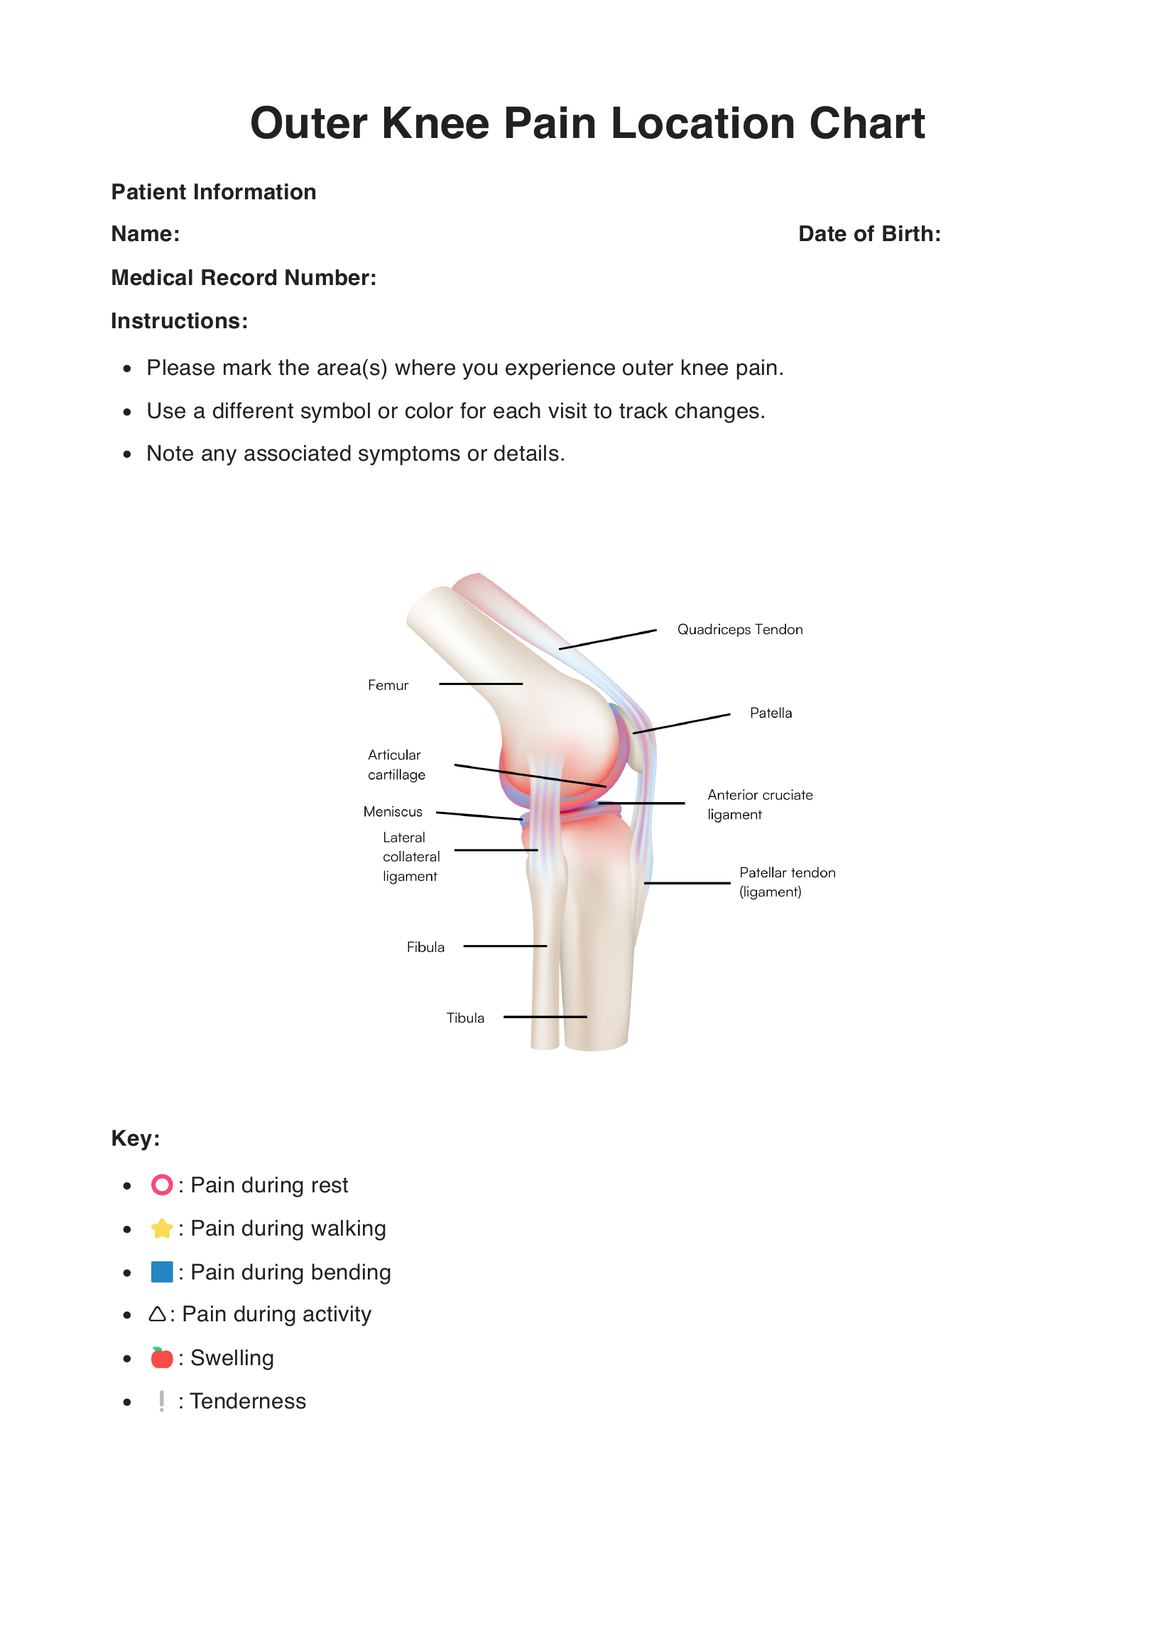 Outer Knee Pain Location Charts PDF Example